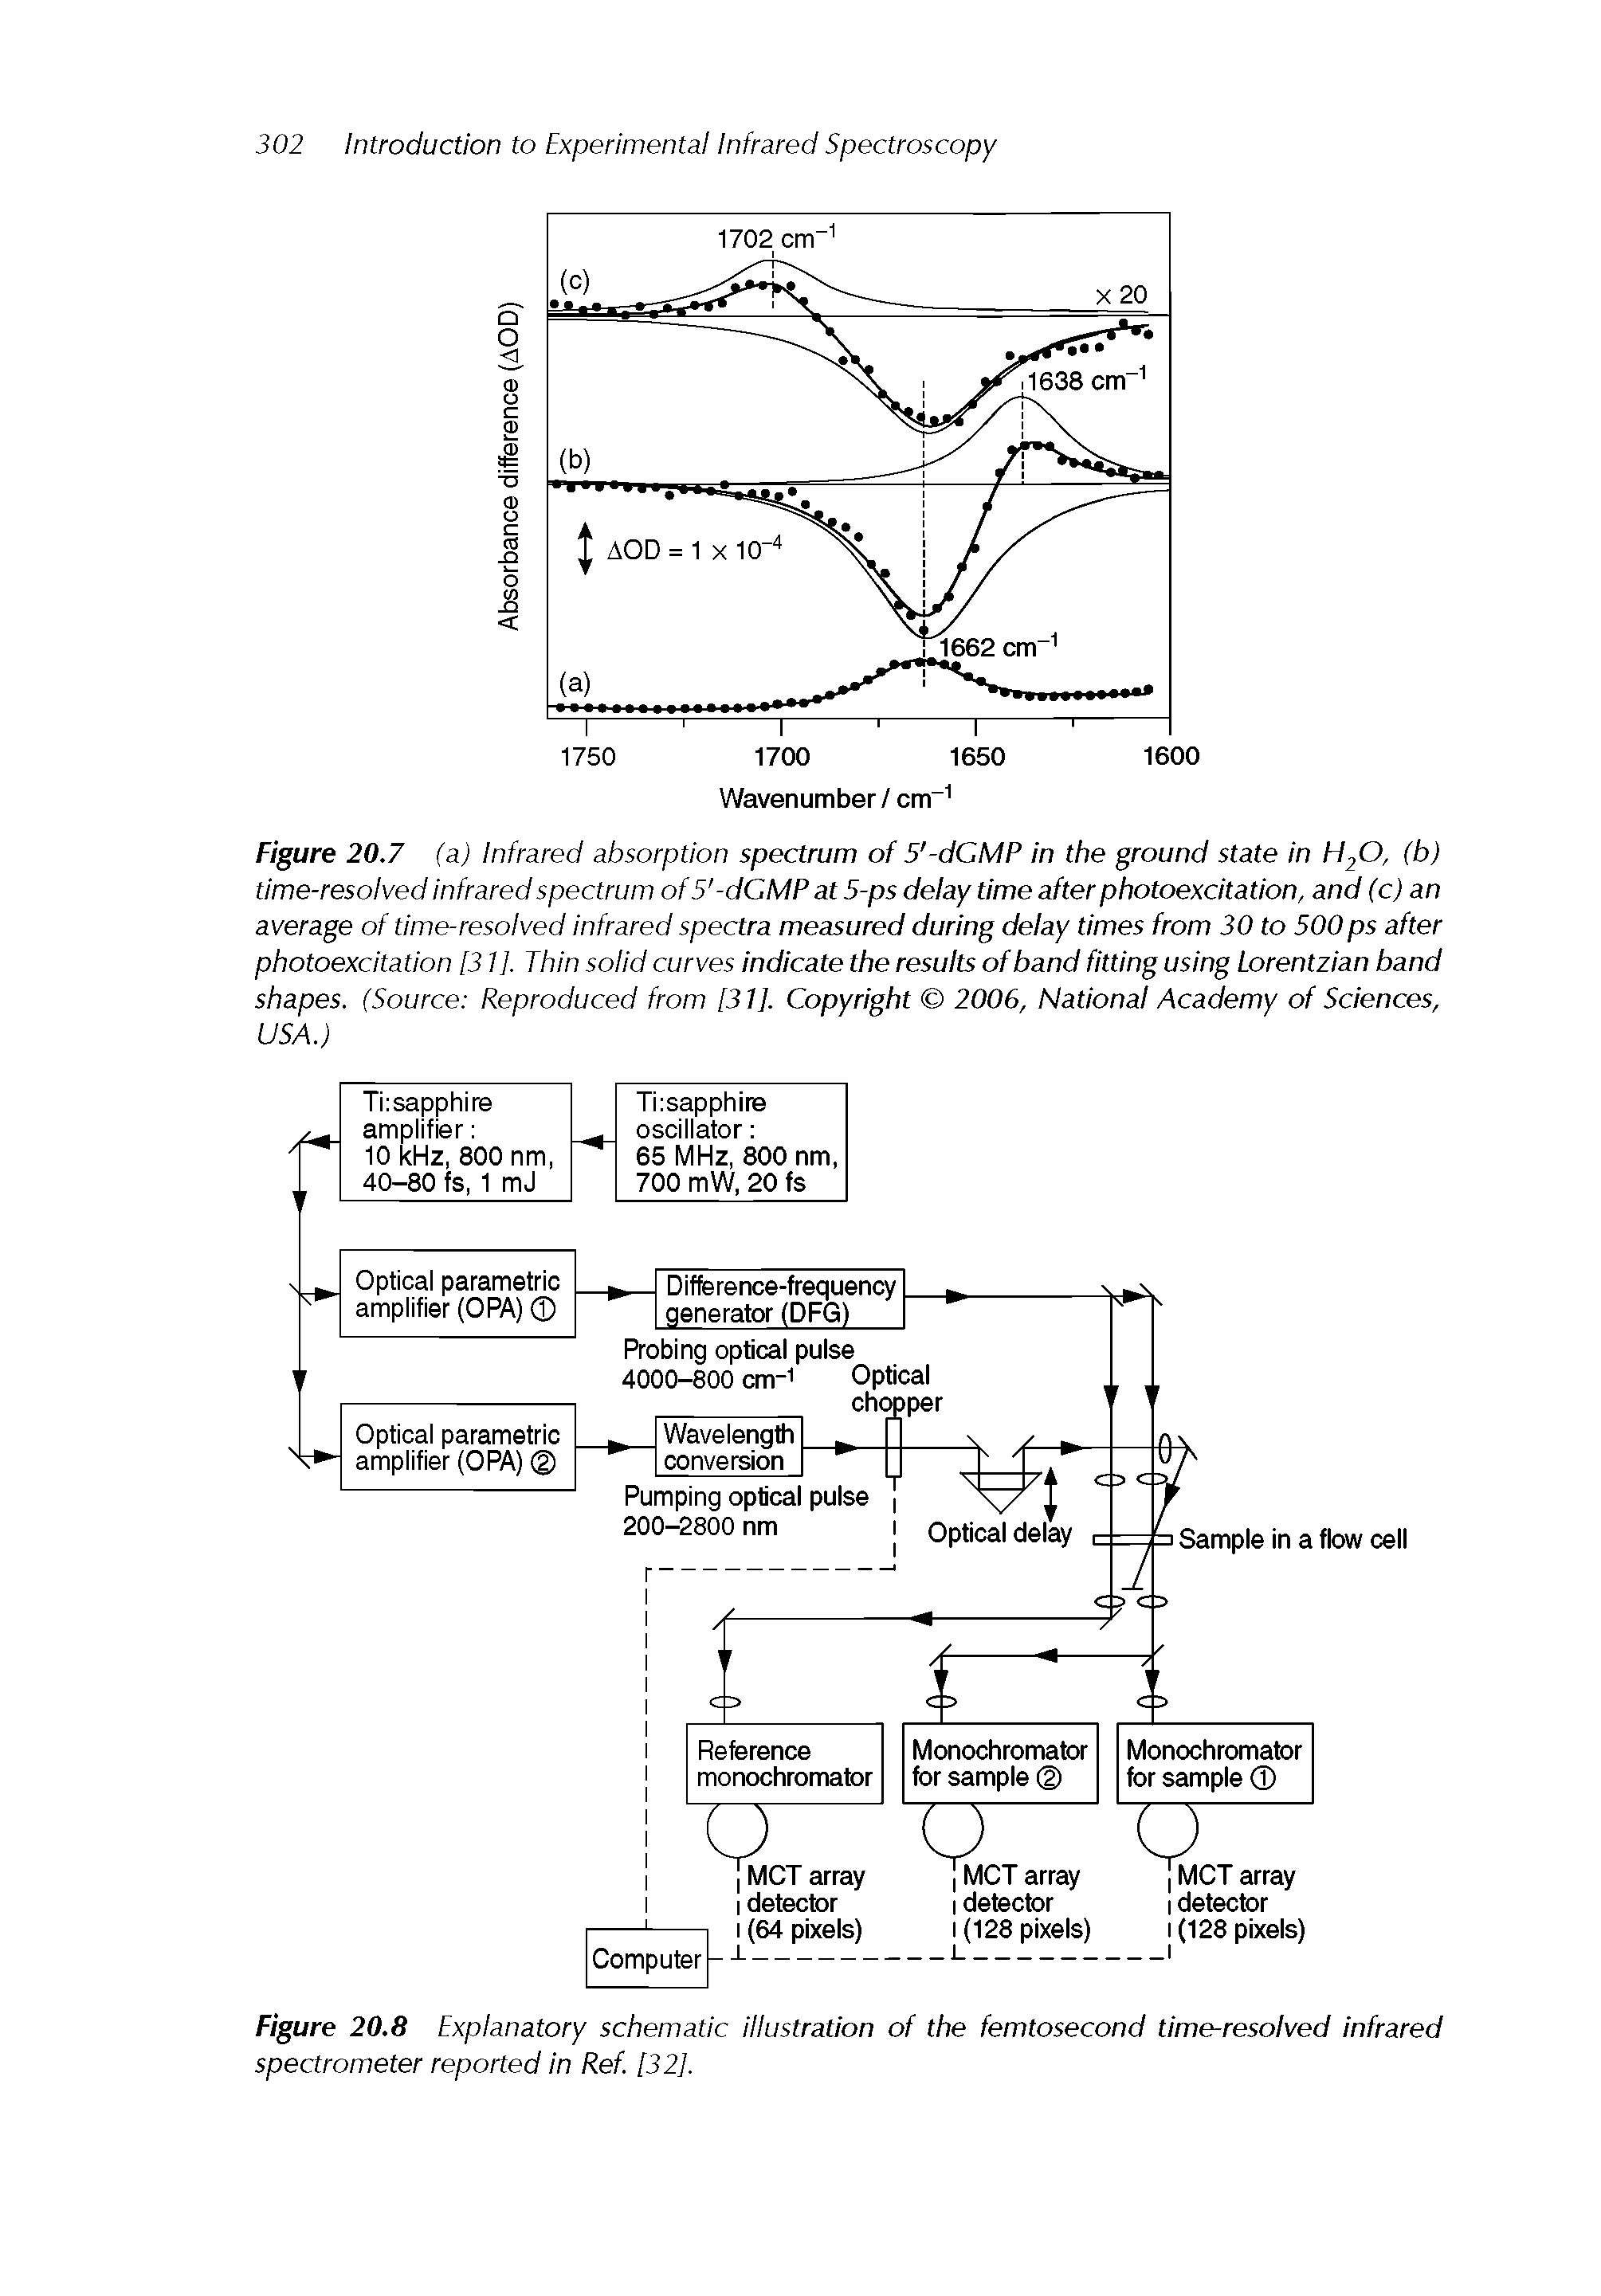 Figure 20.8 Explanatory schematic illustration of the femtosecond time-resolved infrared spectrometer reported in Ref [32].